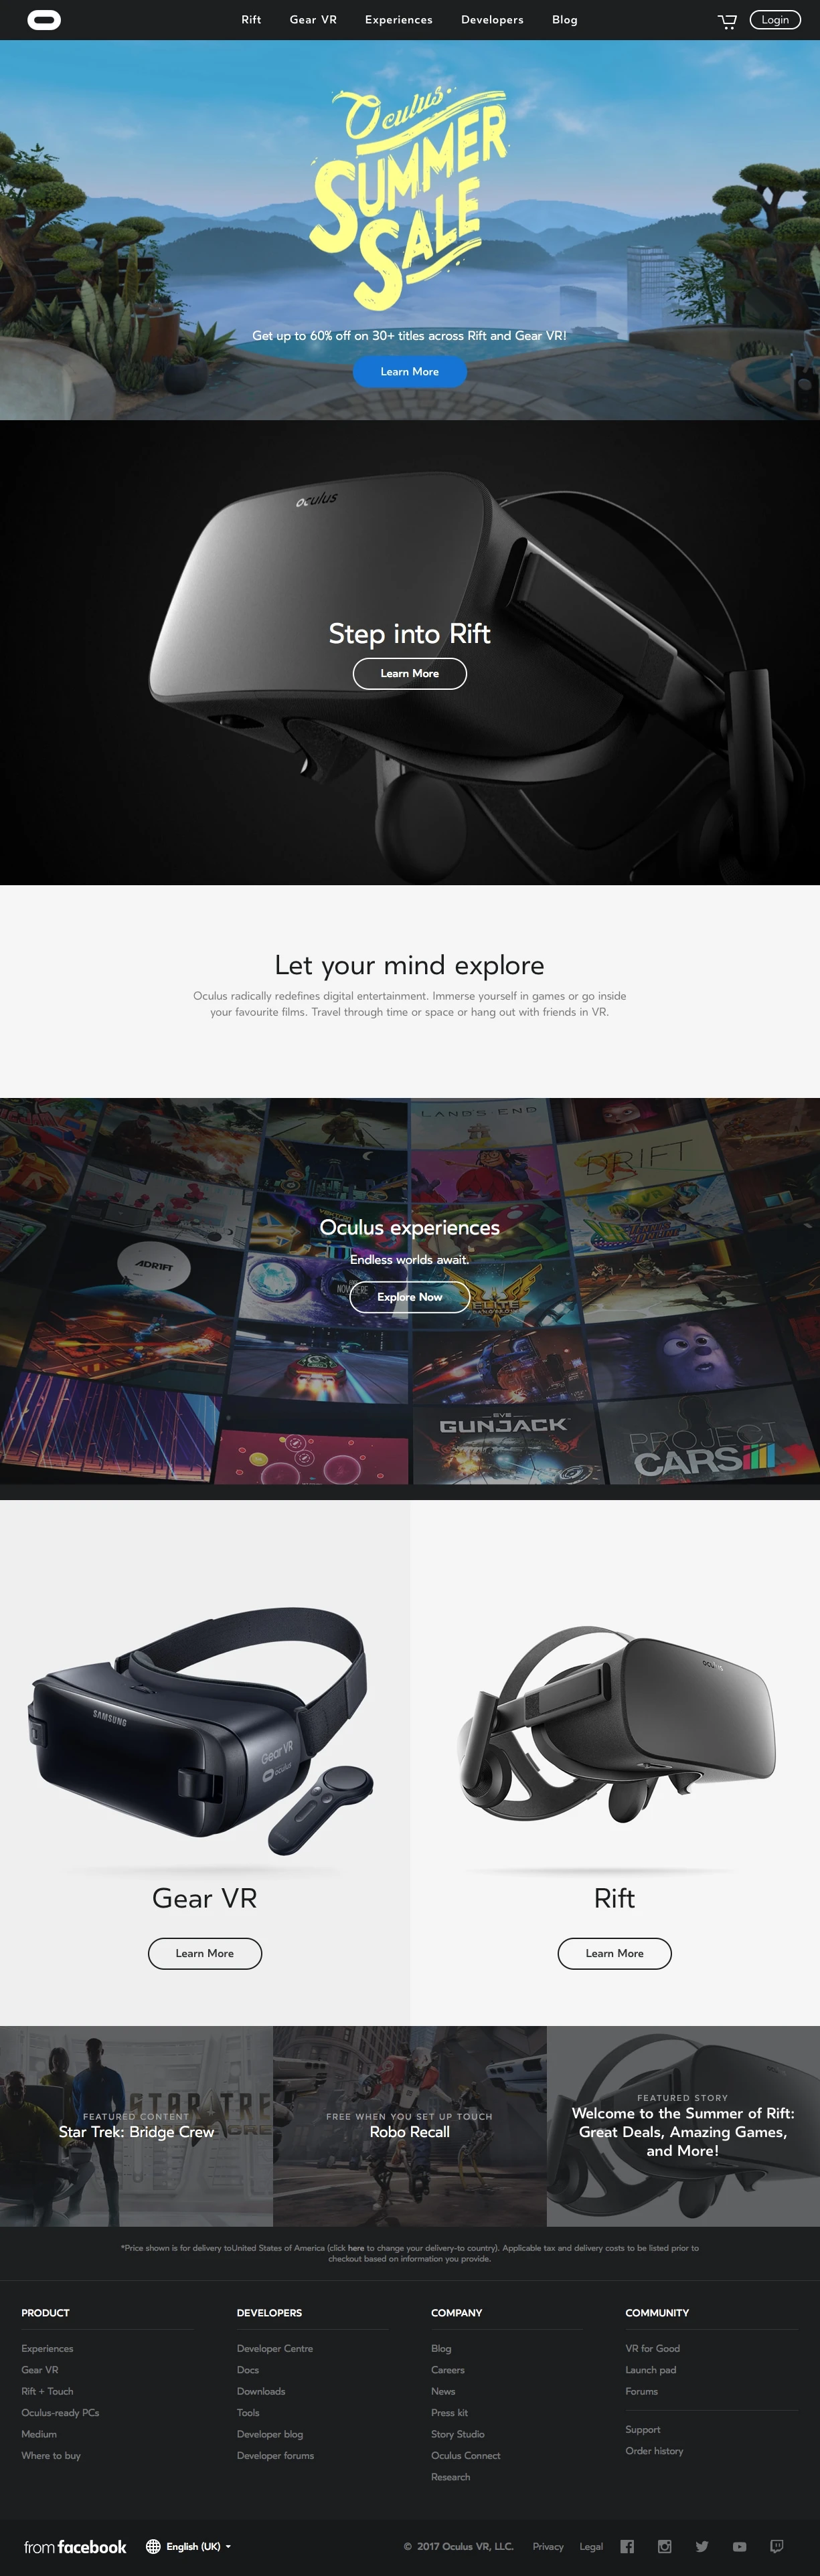 Oculus Landing Page Example: Oculus is making it possible to experience anything, anywhere, through the power of virtual reality.